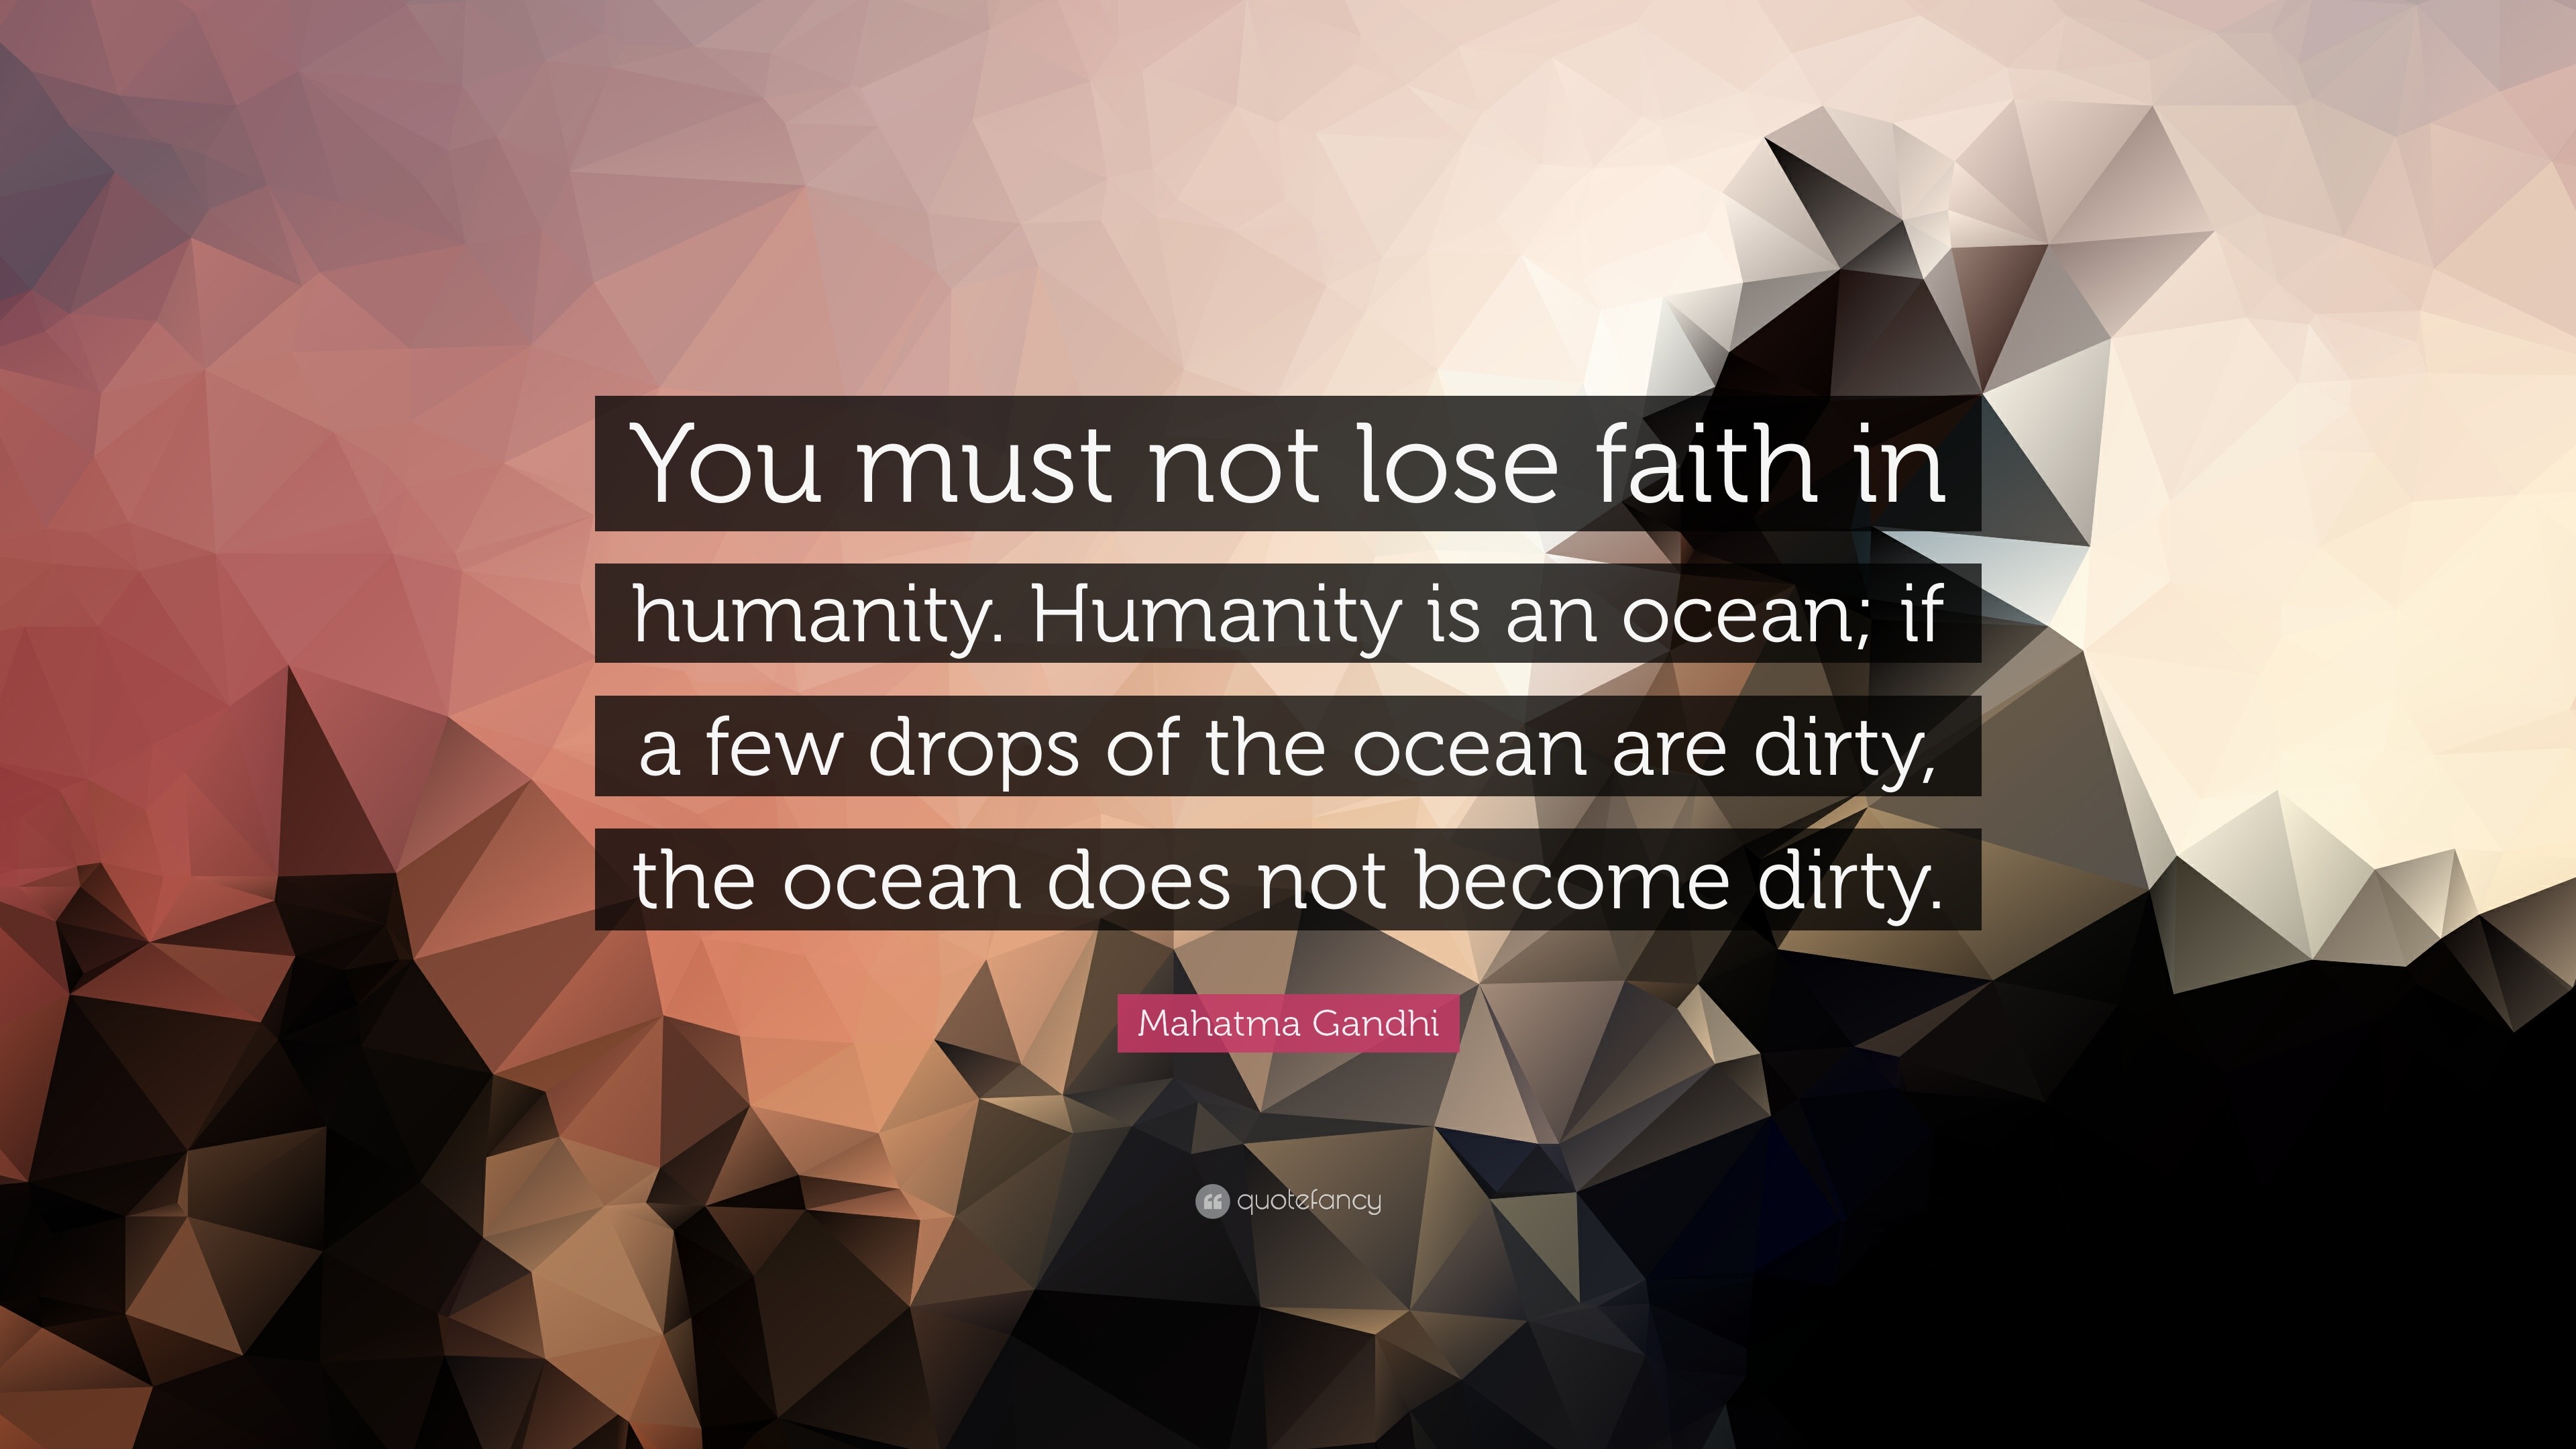 Mahatma Gandhi Quote: "You must not lose faith in humanity. Humanity is an ocean; if a few drops ...